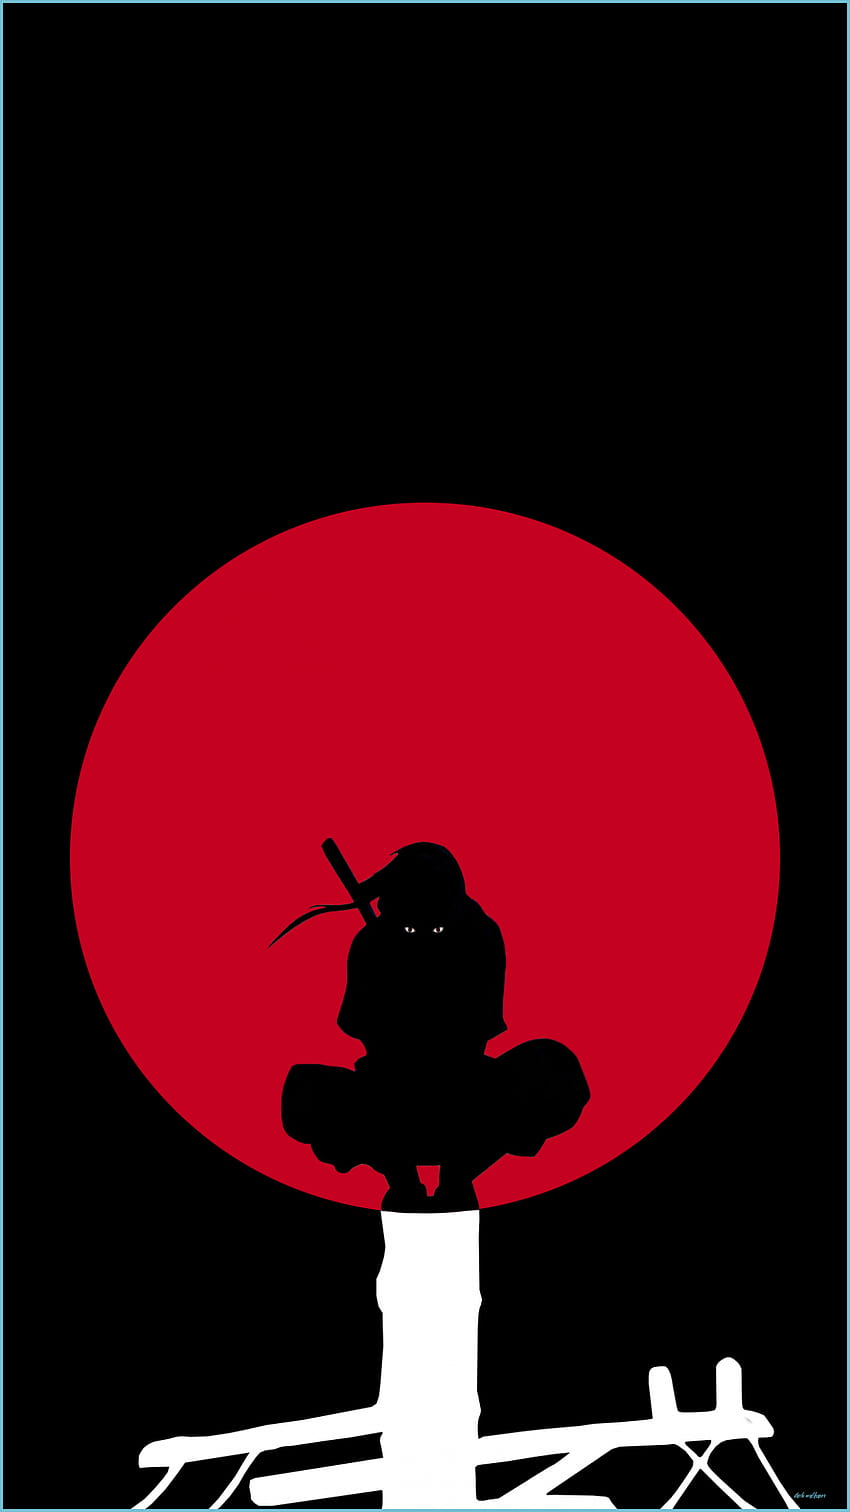 Since there were no good Itachi amoled , I made one on, live itachi HD phone wallpaper